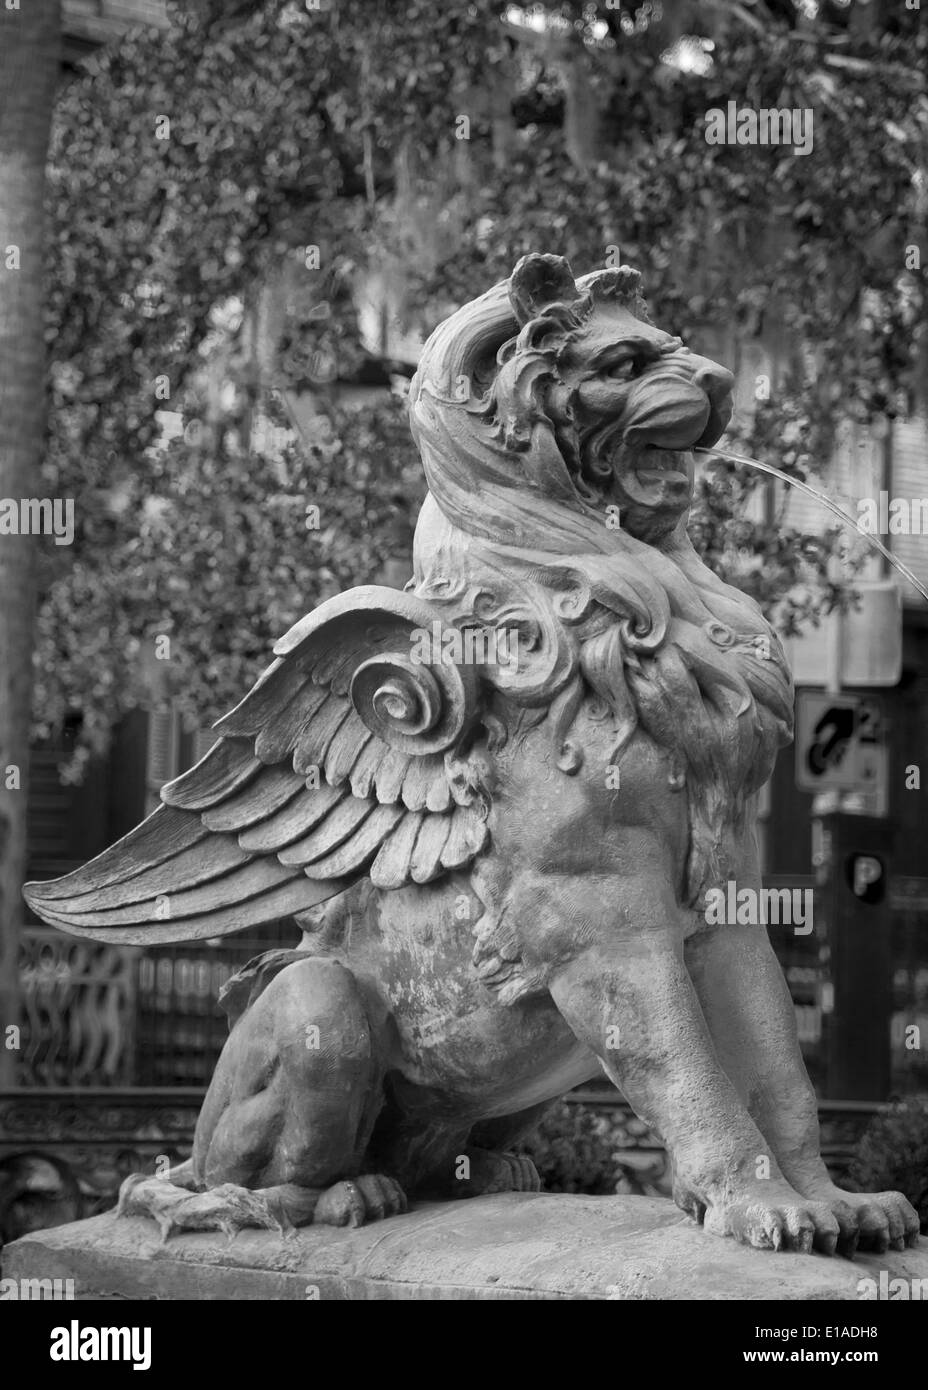 A statue of a winged lion. Stock Photo